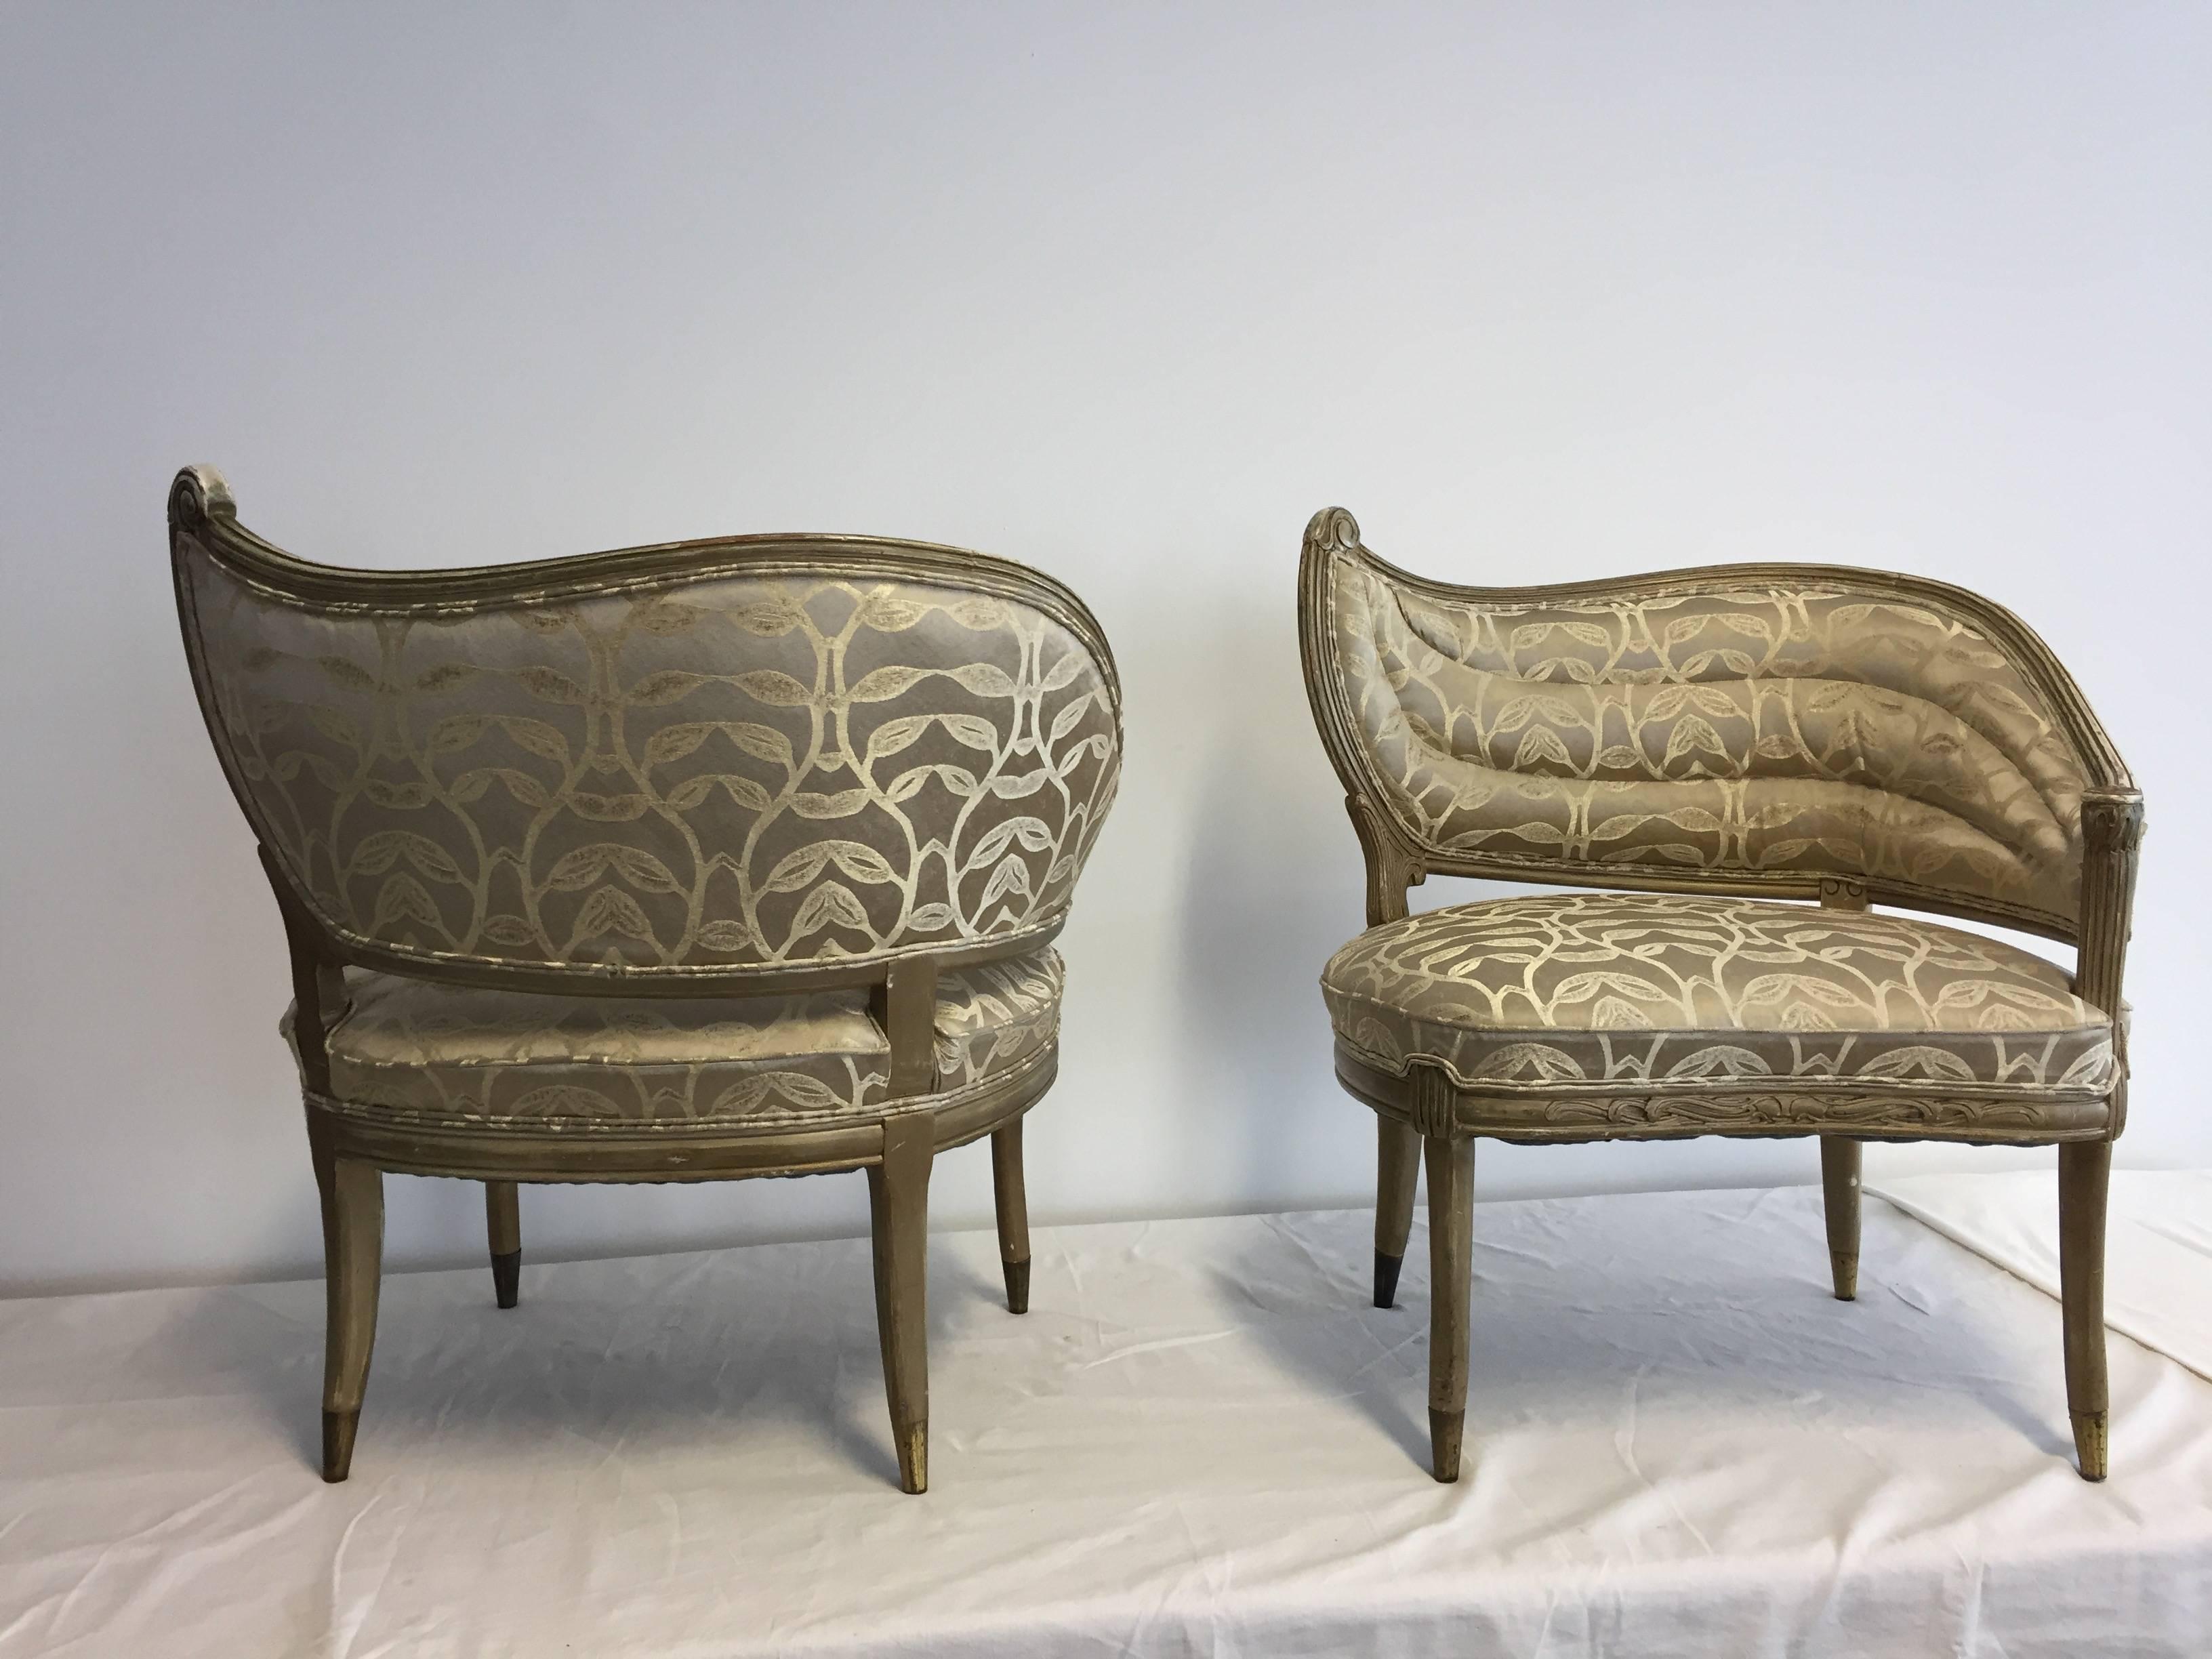 Pair of decorative armchairs, back together with armrest in wing shape,
New upholstered In Rubelli fabric, gilded wood with carving details, each leg has a brass cup.